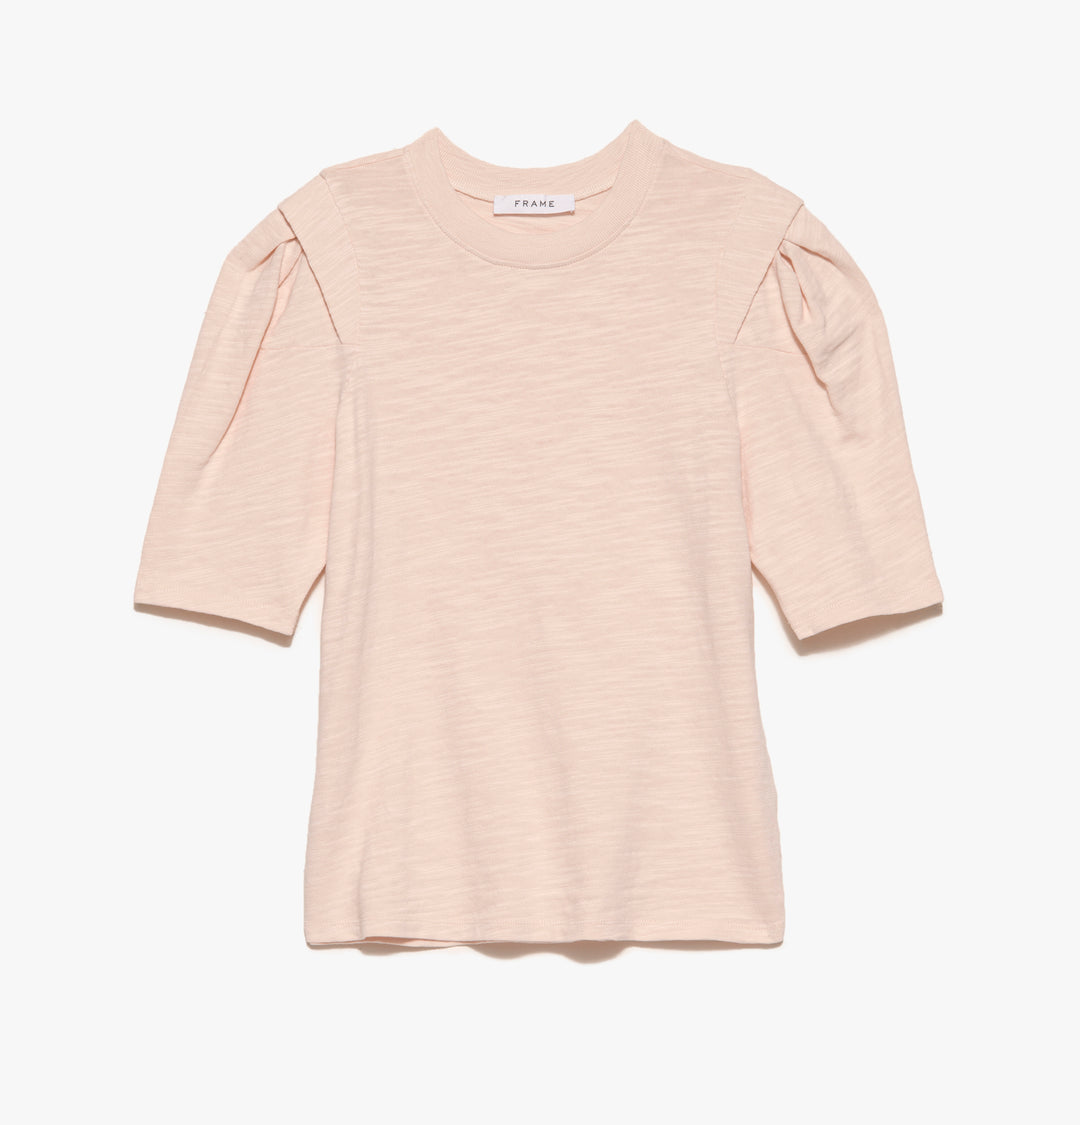 Frame - Pleated Panel Tee in Nude Pink